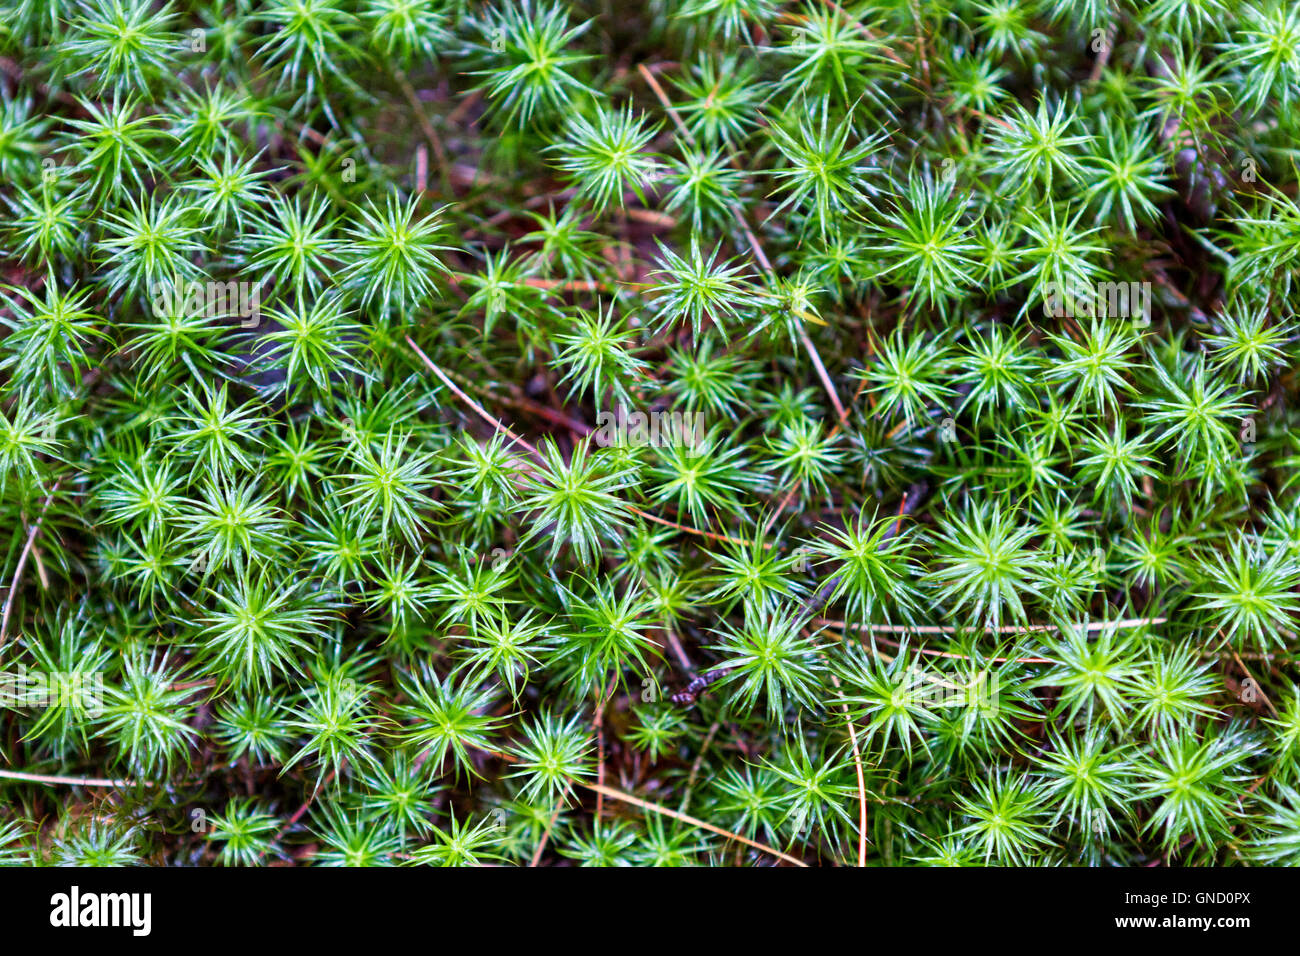 Green spiky leaves plant on forest floor Stock Photo